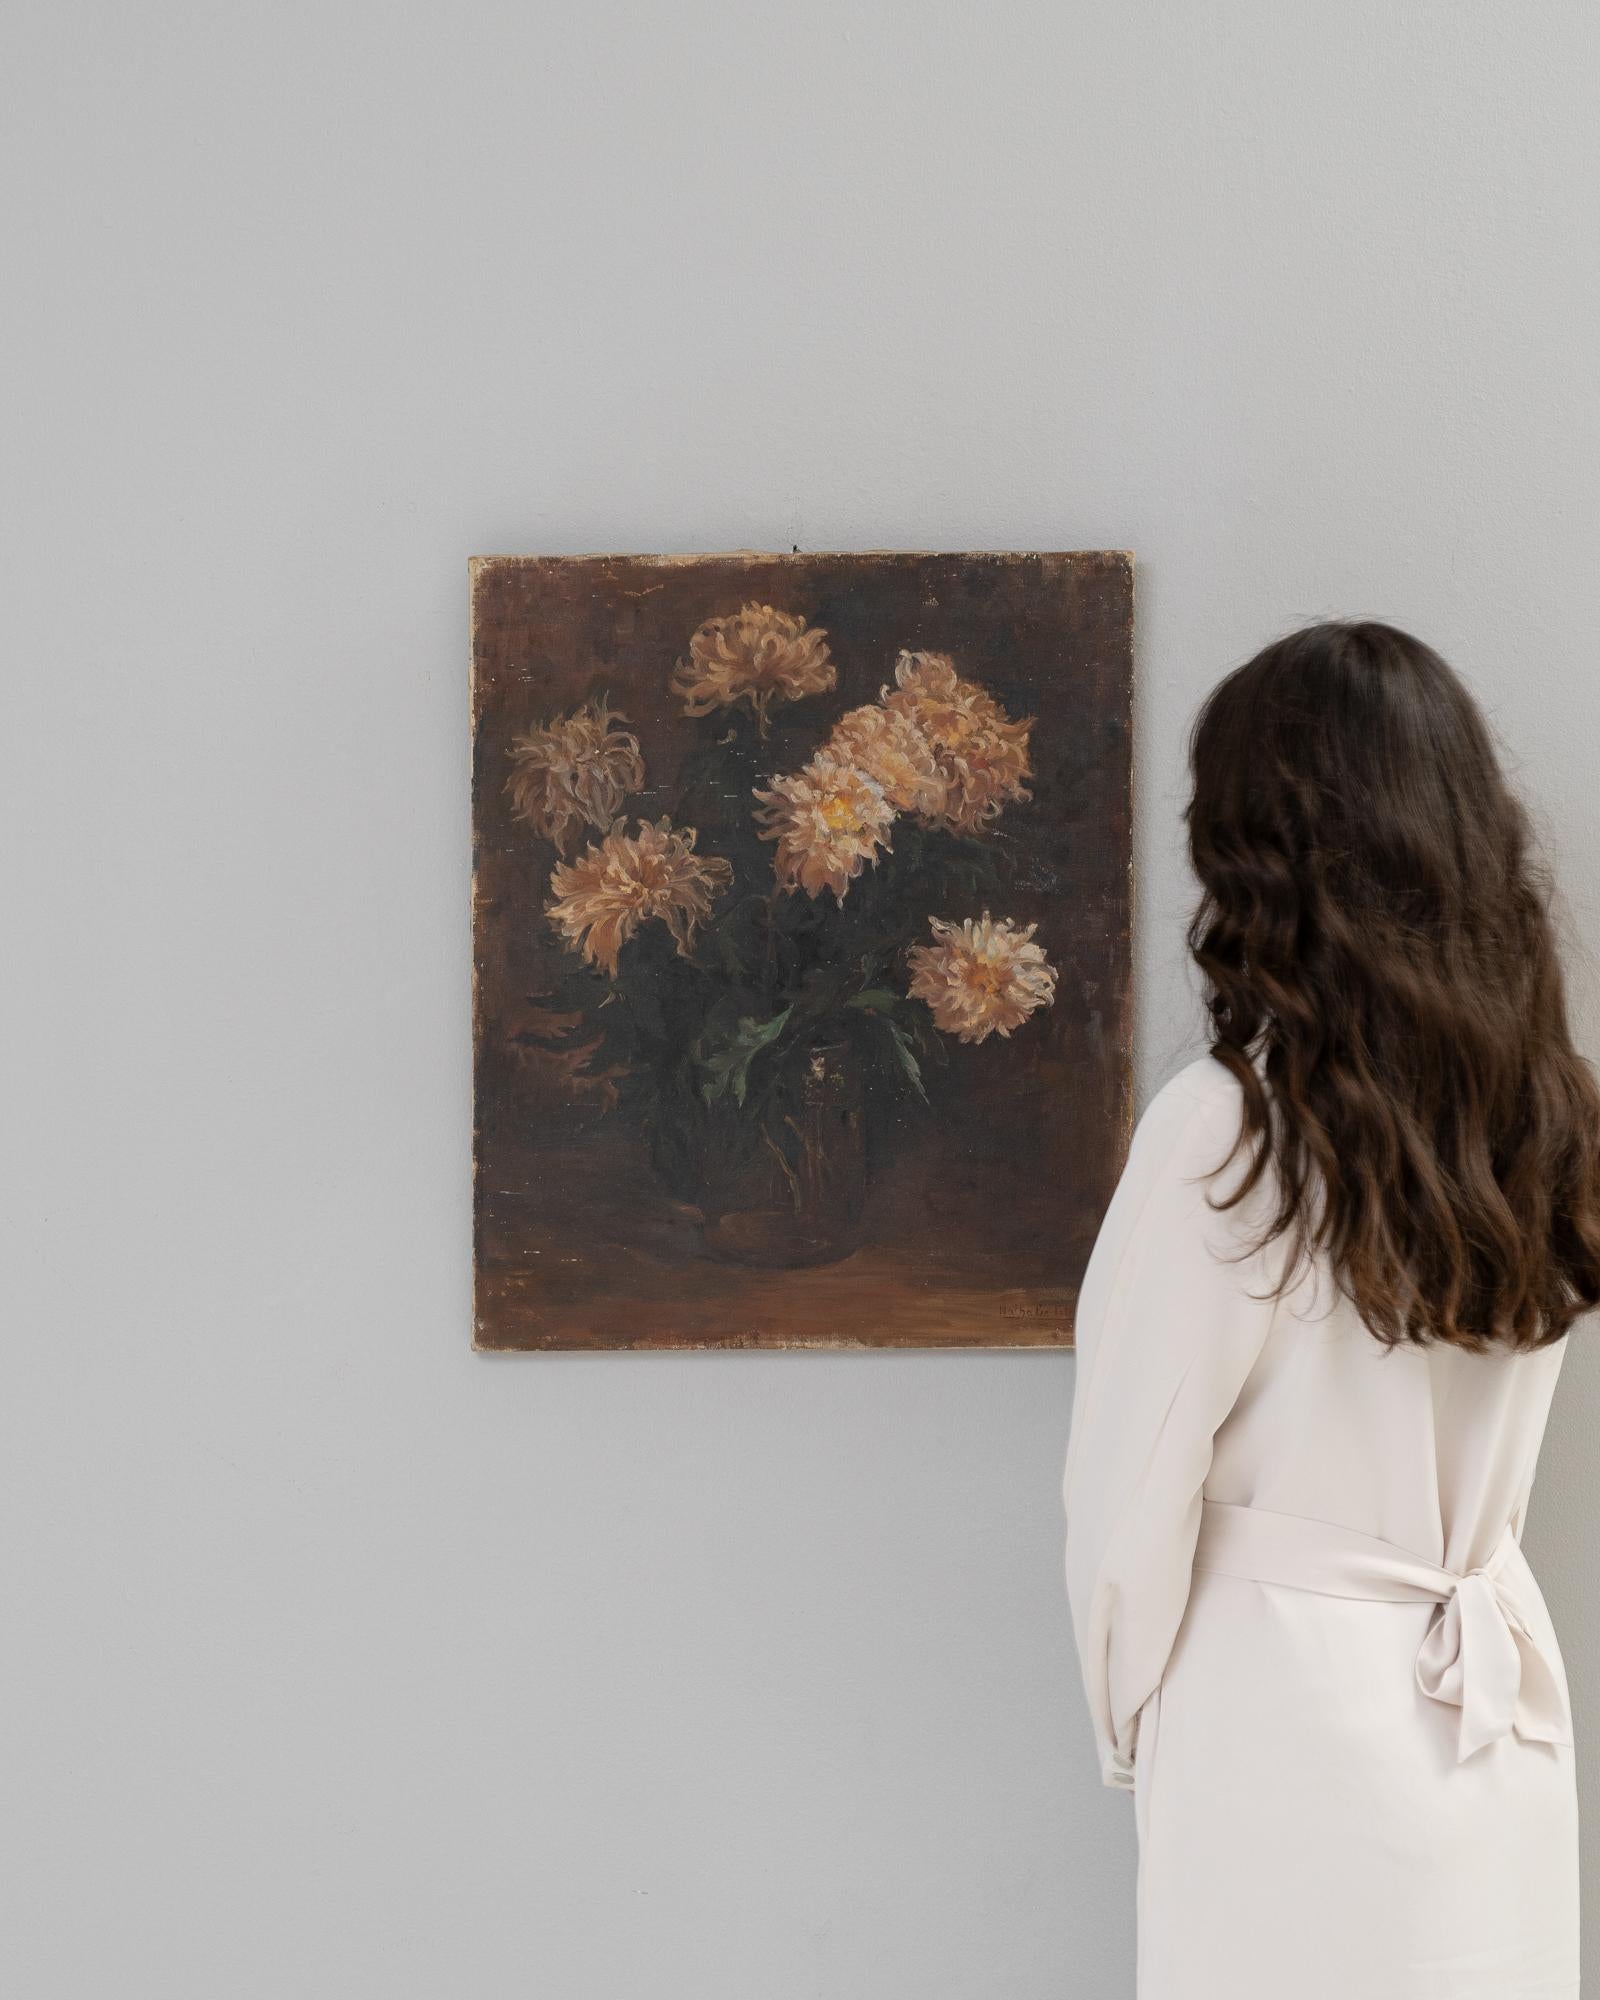 This 20th-century Belgian painting captures a bouquet of chrysanthemums in full bloom, their petals a symphony of golden and amber hues that bring warmth to the canvas. The dark background contrasts sharply with the vibrant blossoms, making them